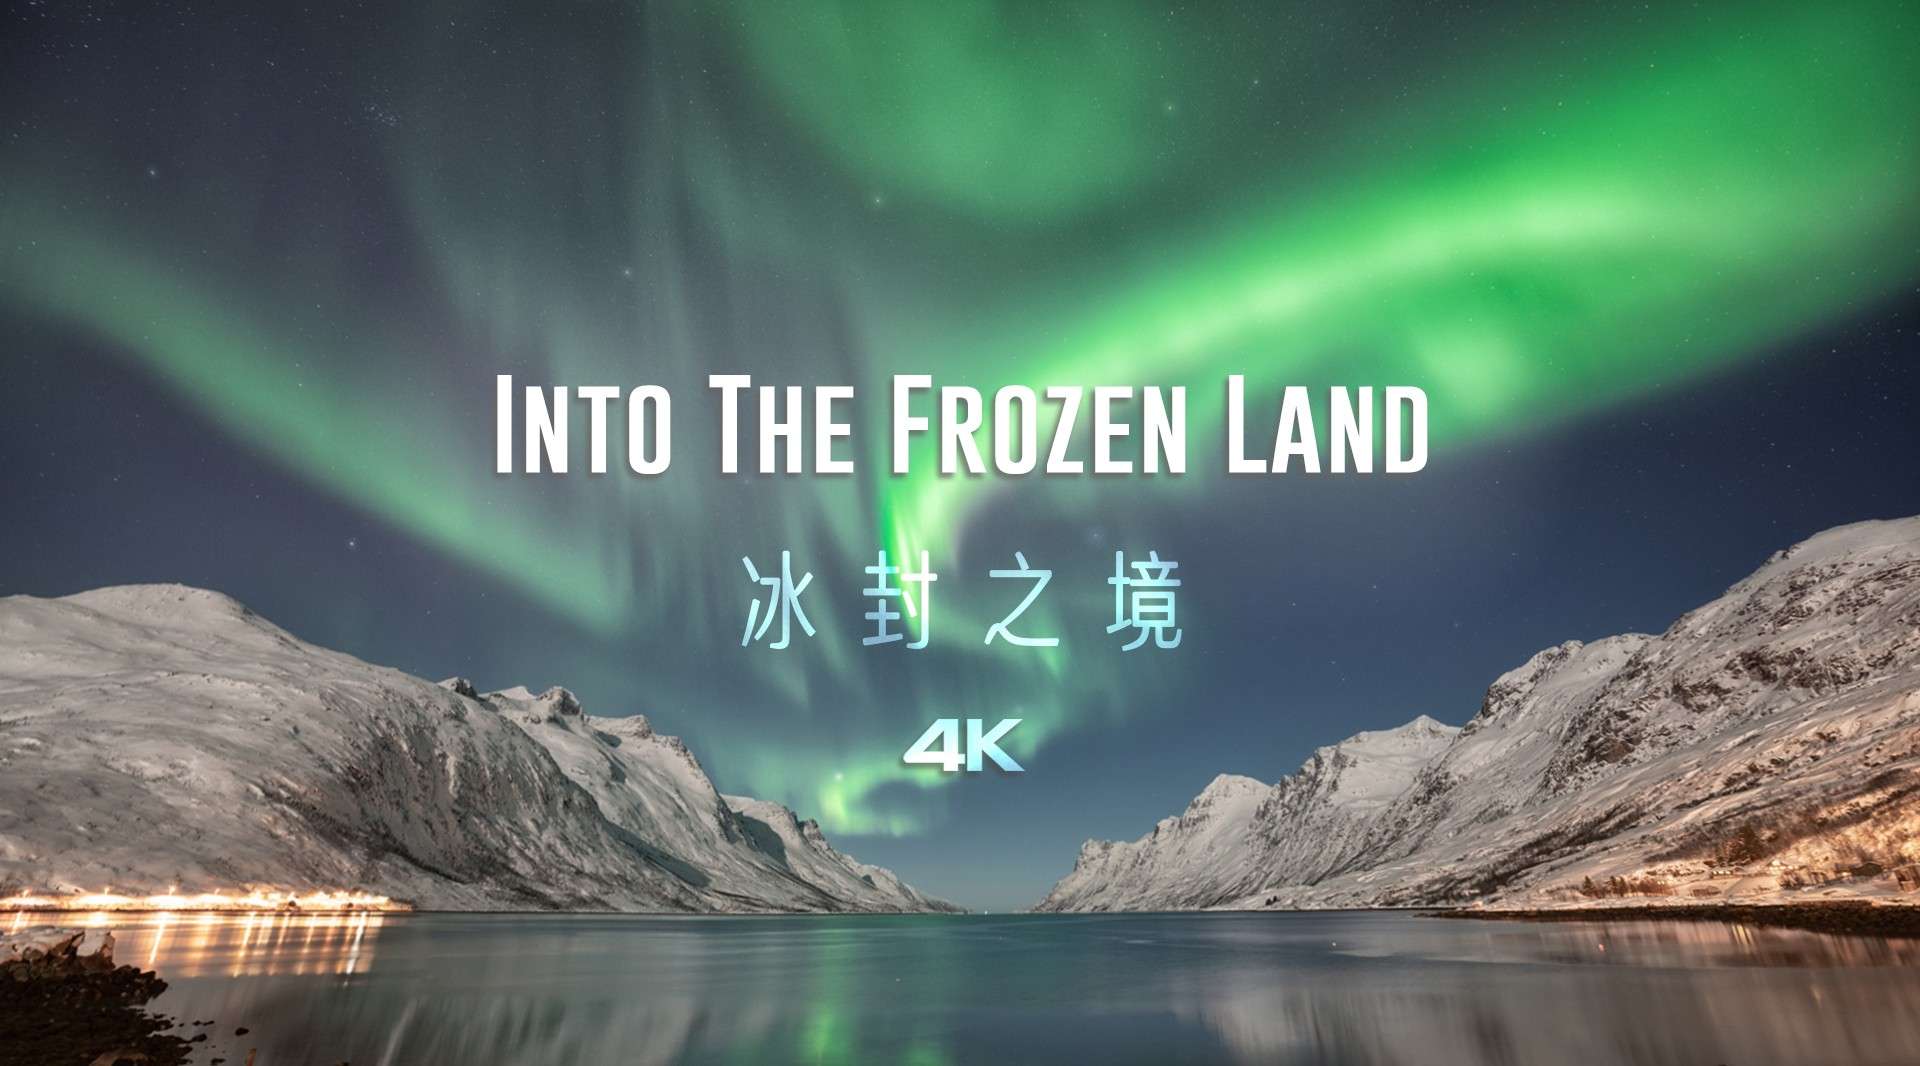 Into The Frozen Land - 冰封之境